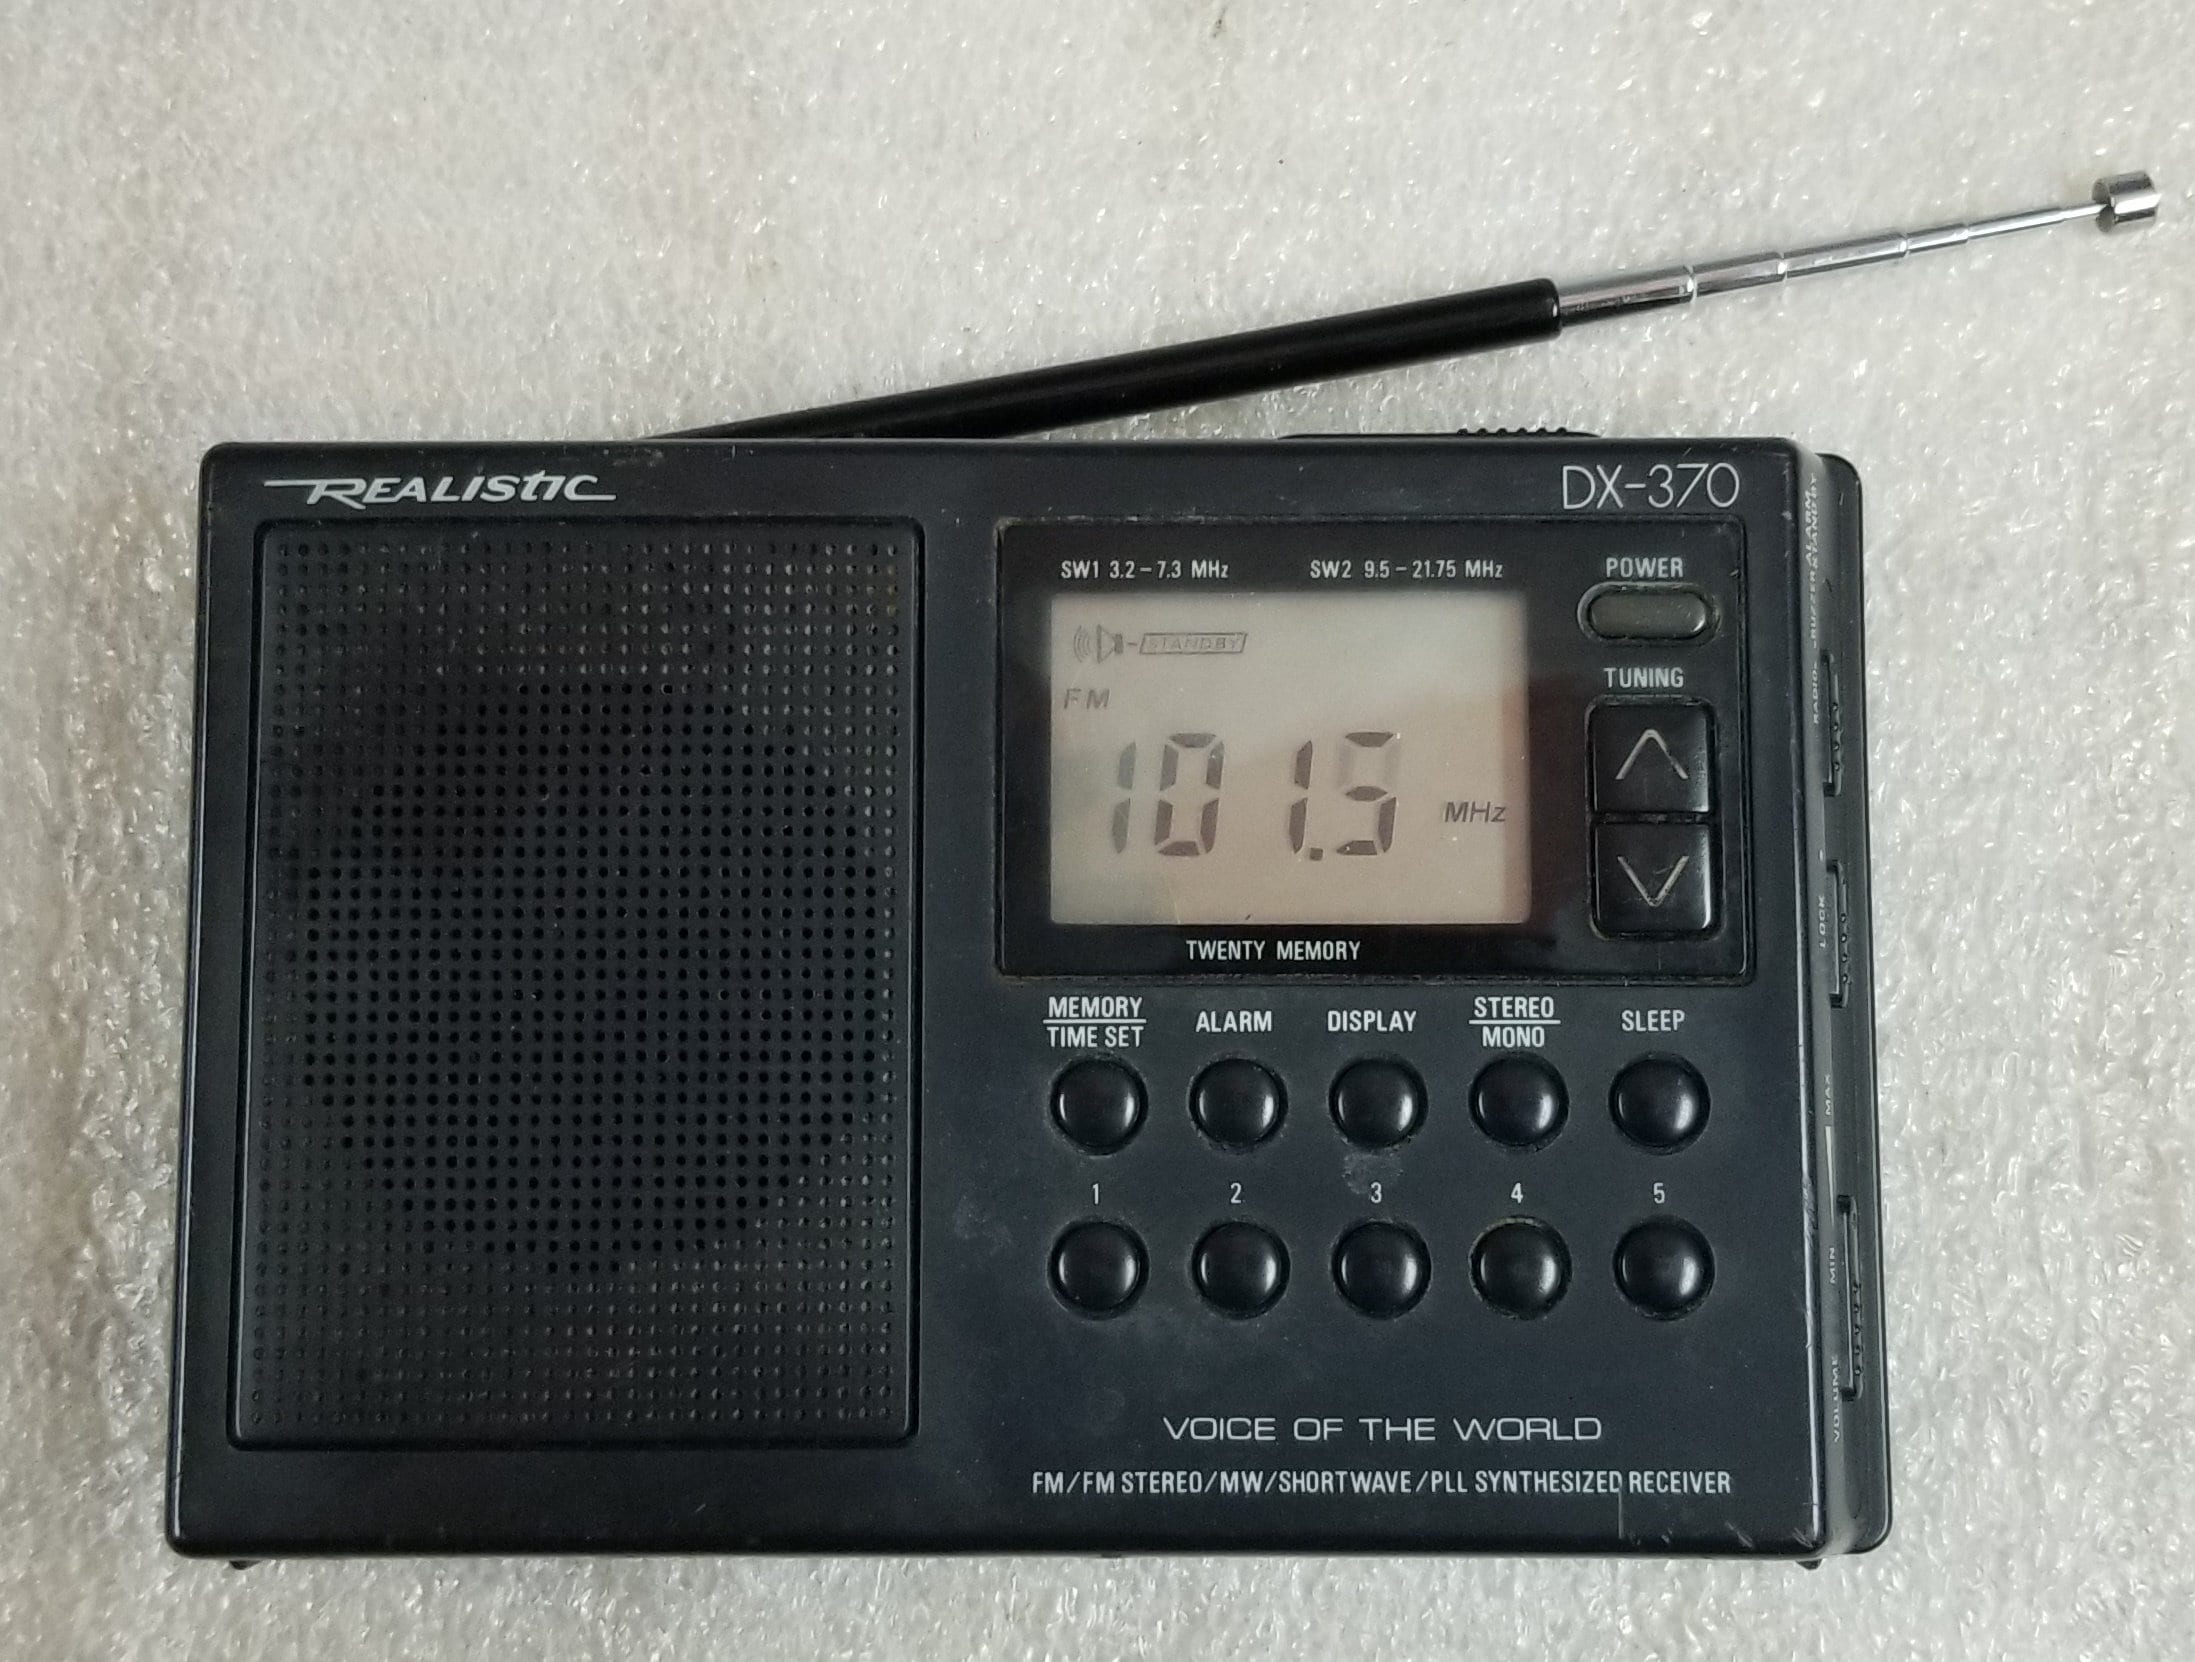 Realistic DX-370 VOICE of the WORLD Mw/sw/am/fm/pll Portable